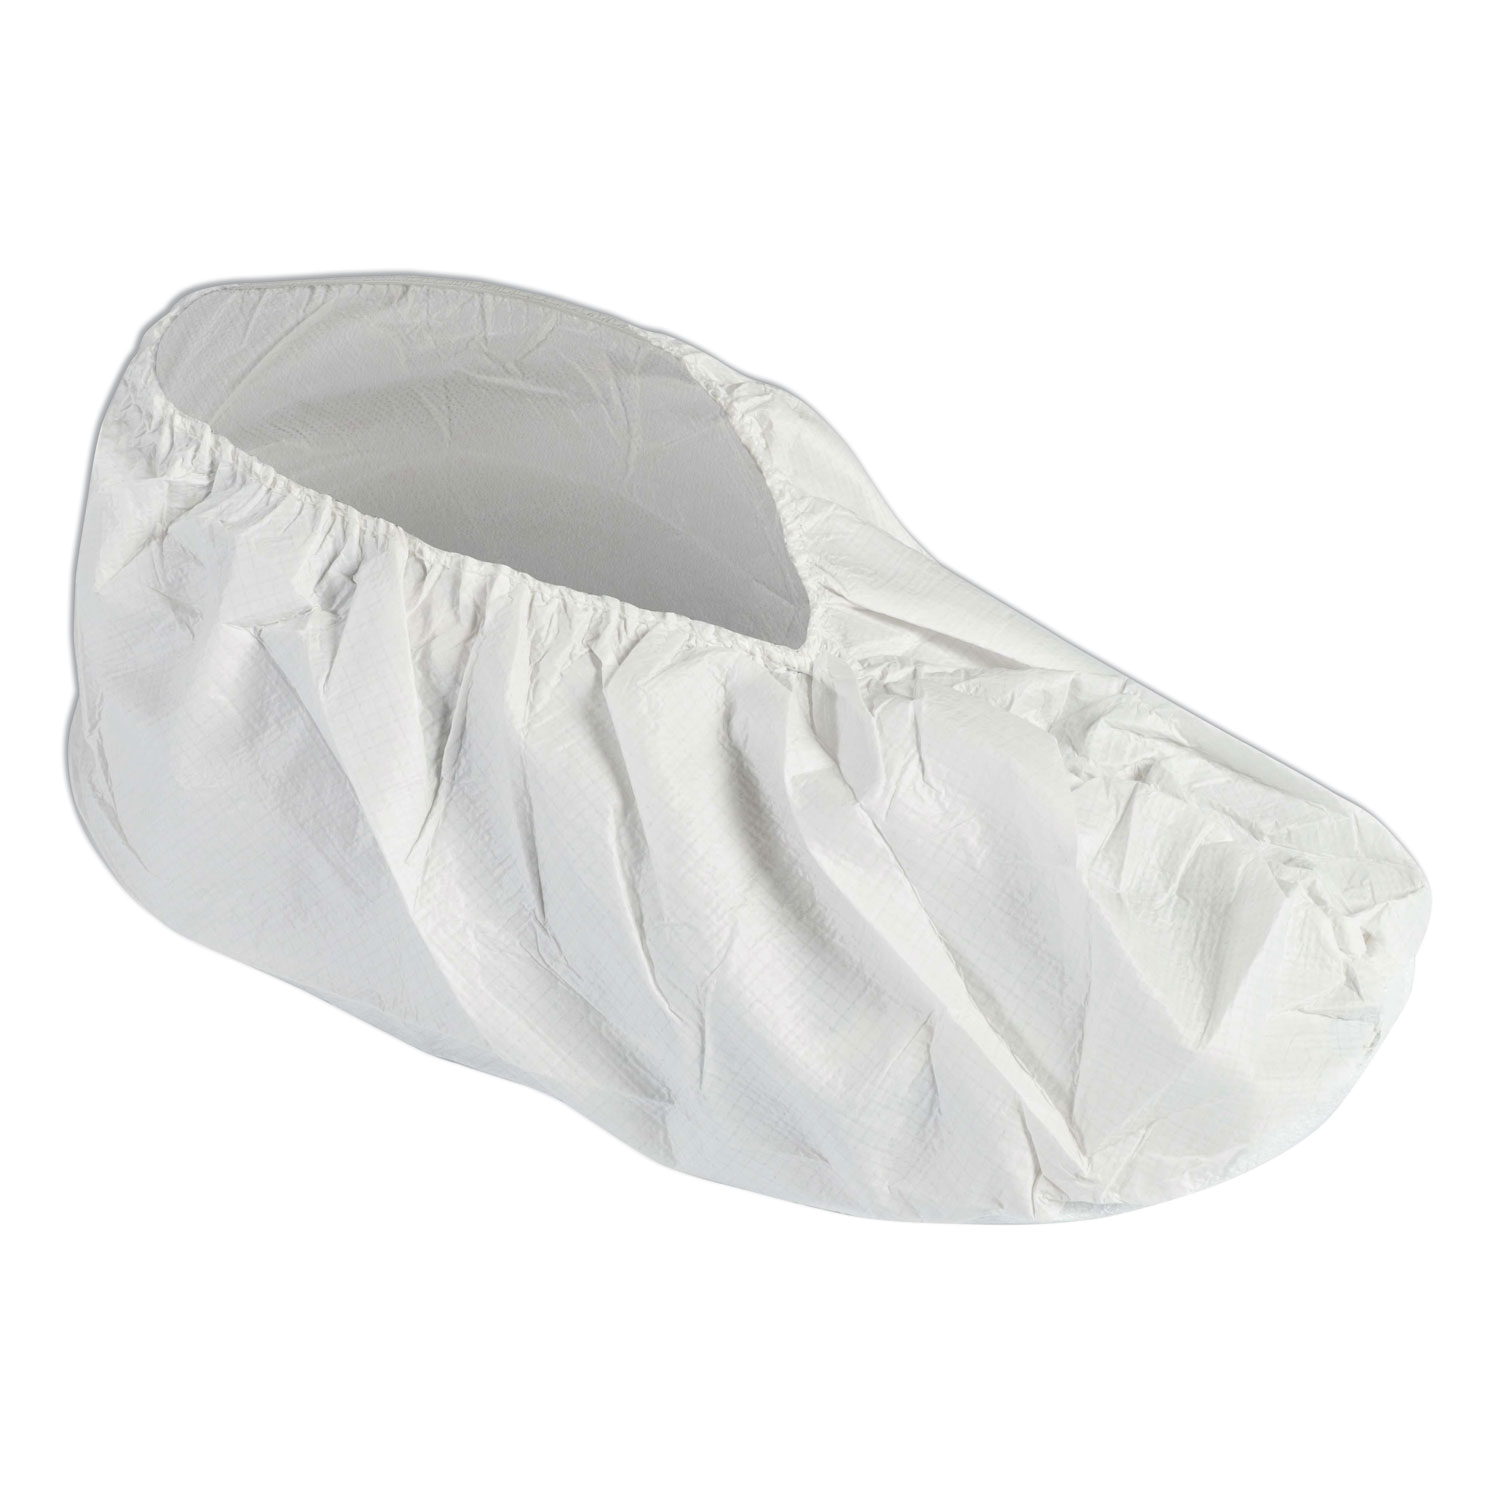  KleenGuard 44494 A40 Liquid/Particle Protection Shoe Covers, White, X-Large-2X-Large, 400/CT (KCC44494) 